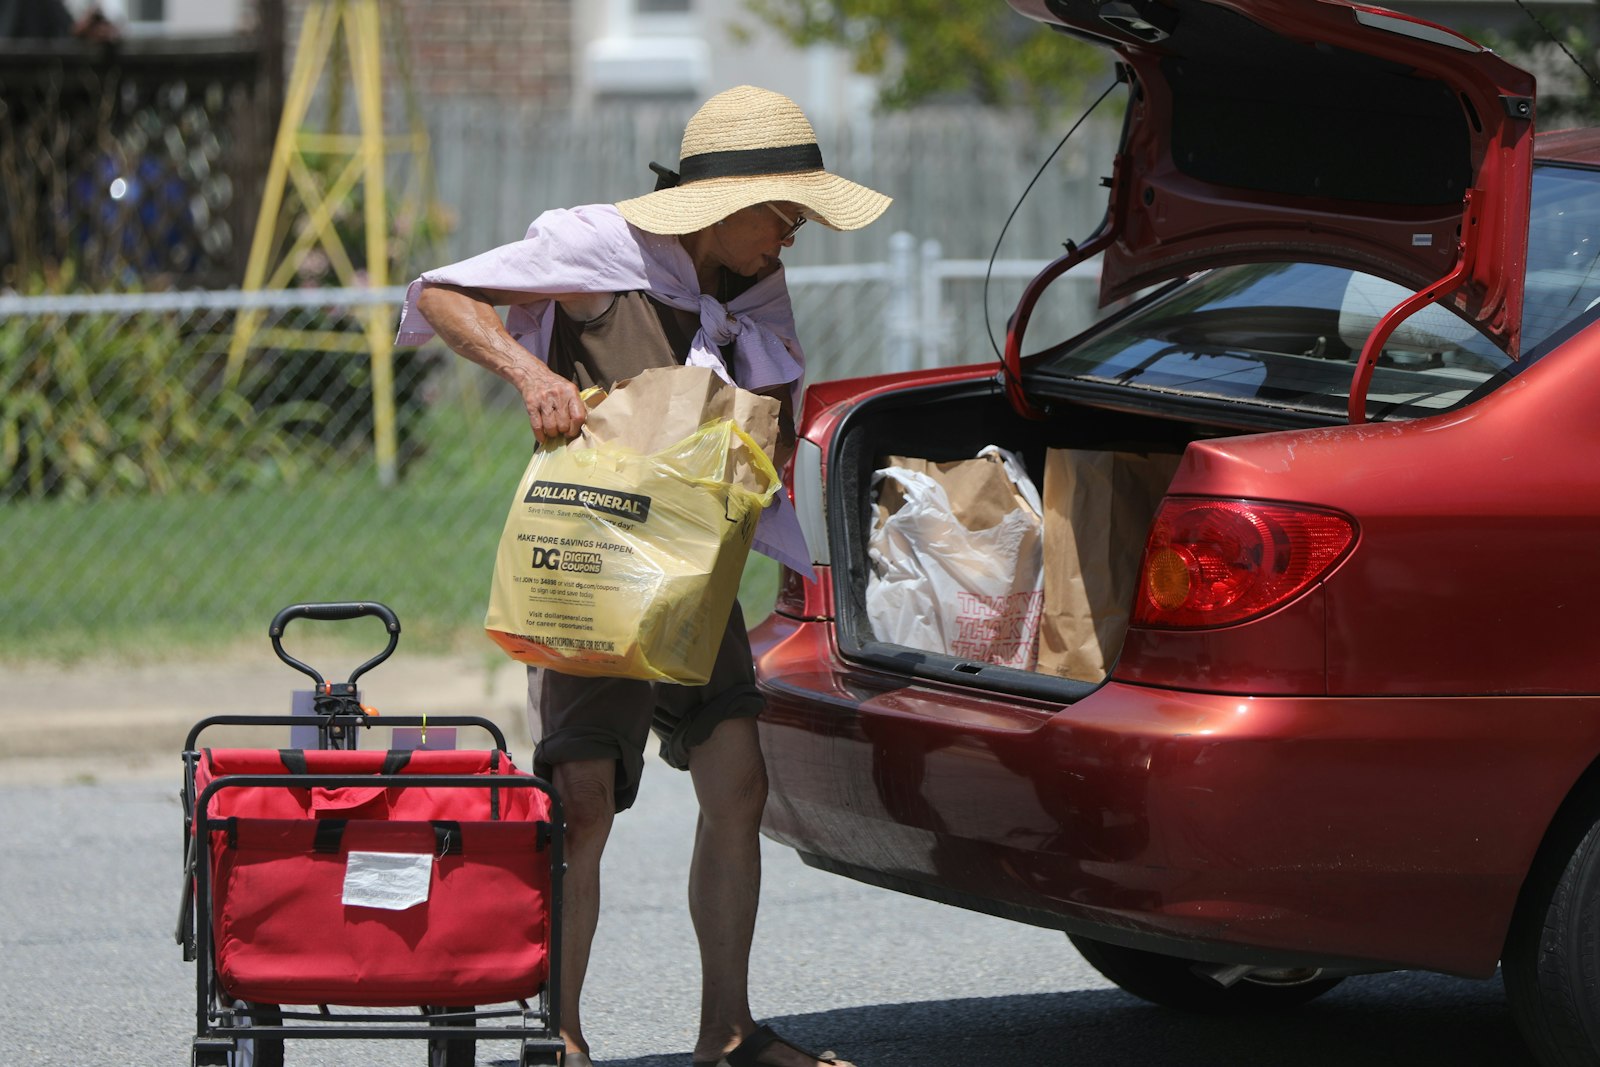 A volunteer with the Ladies of Charity of Calvert County, Md., loads bags of food and other provisions into the car of a person in need at a food pantry July 13, 2021, held on the grounds of St. Anthony's Catholic Church in North Beach. Thirty years ago, in November 1993, the U.S. bishops approved the statement "Communities of Salt and Light: Reflections on the Social Mission of the Parish," which continues to serve as a roadmap for parish social ministry. (OSV News photo/Bob Roller)